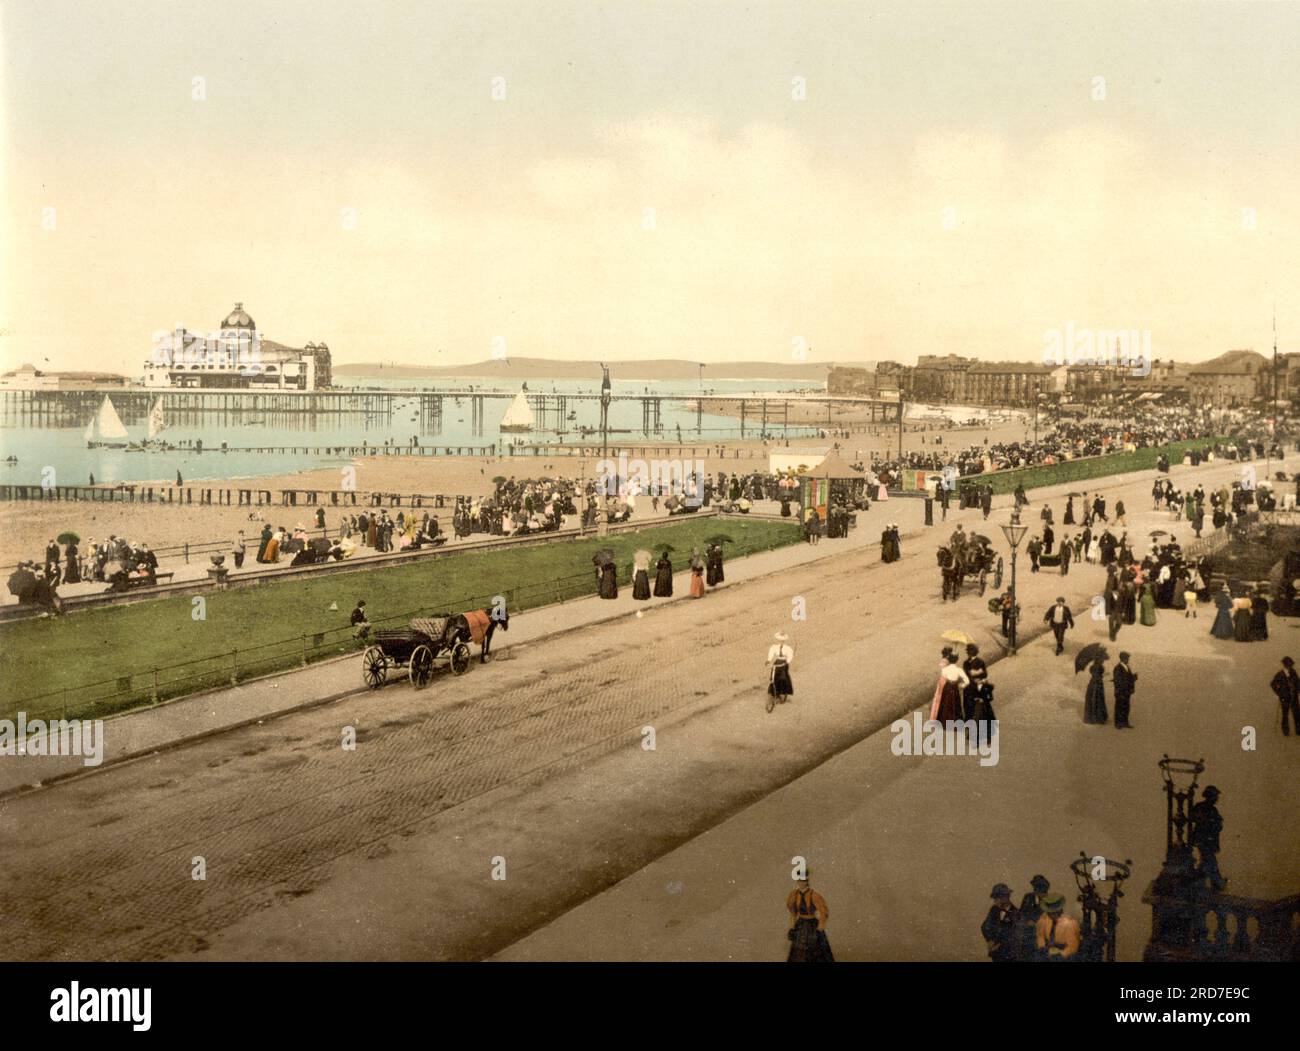 Parade and pier, Morecambe, a seaside town and civil parish in the City of Lancaster, England, 1895, Historical, digital improved reproduction of an old Photochrome print Stock Photo